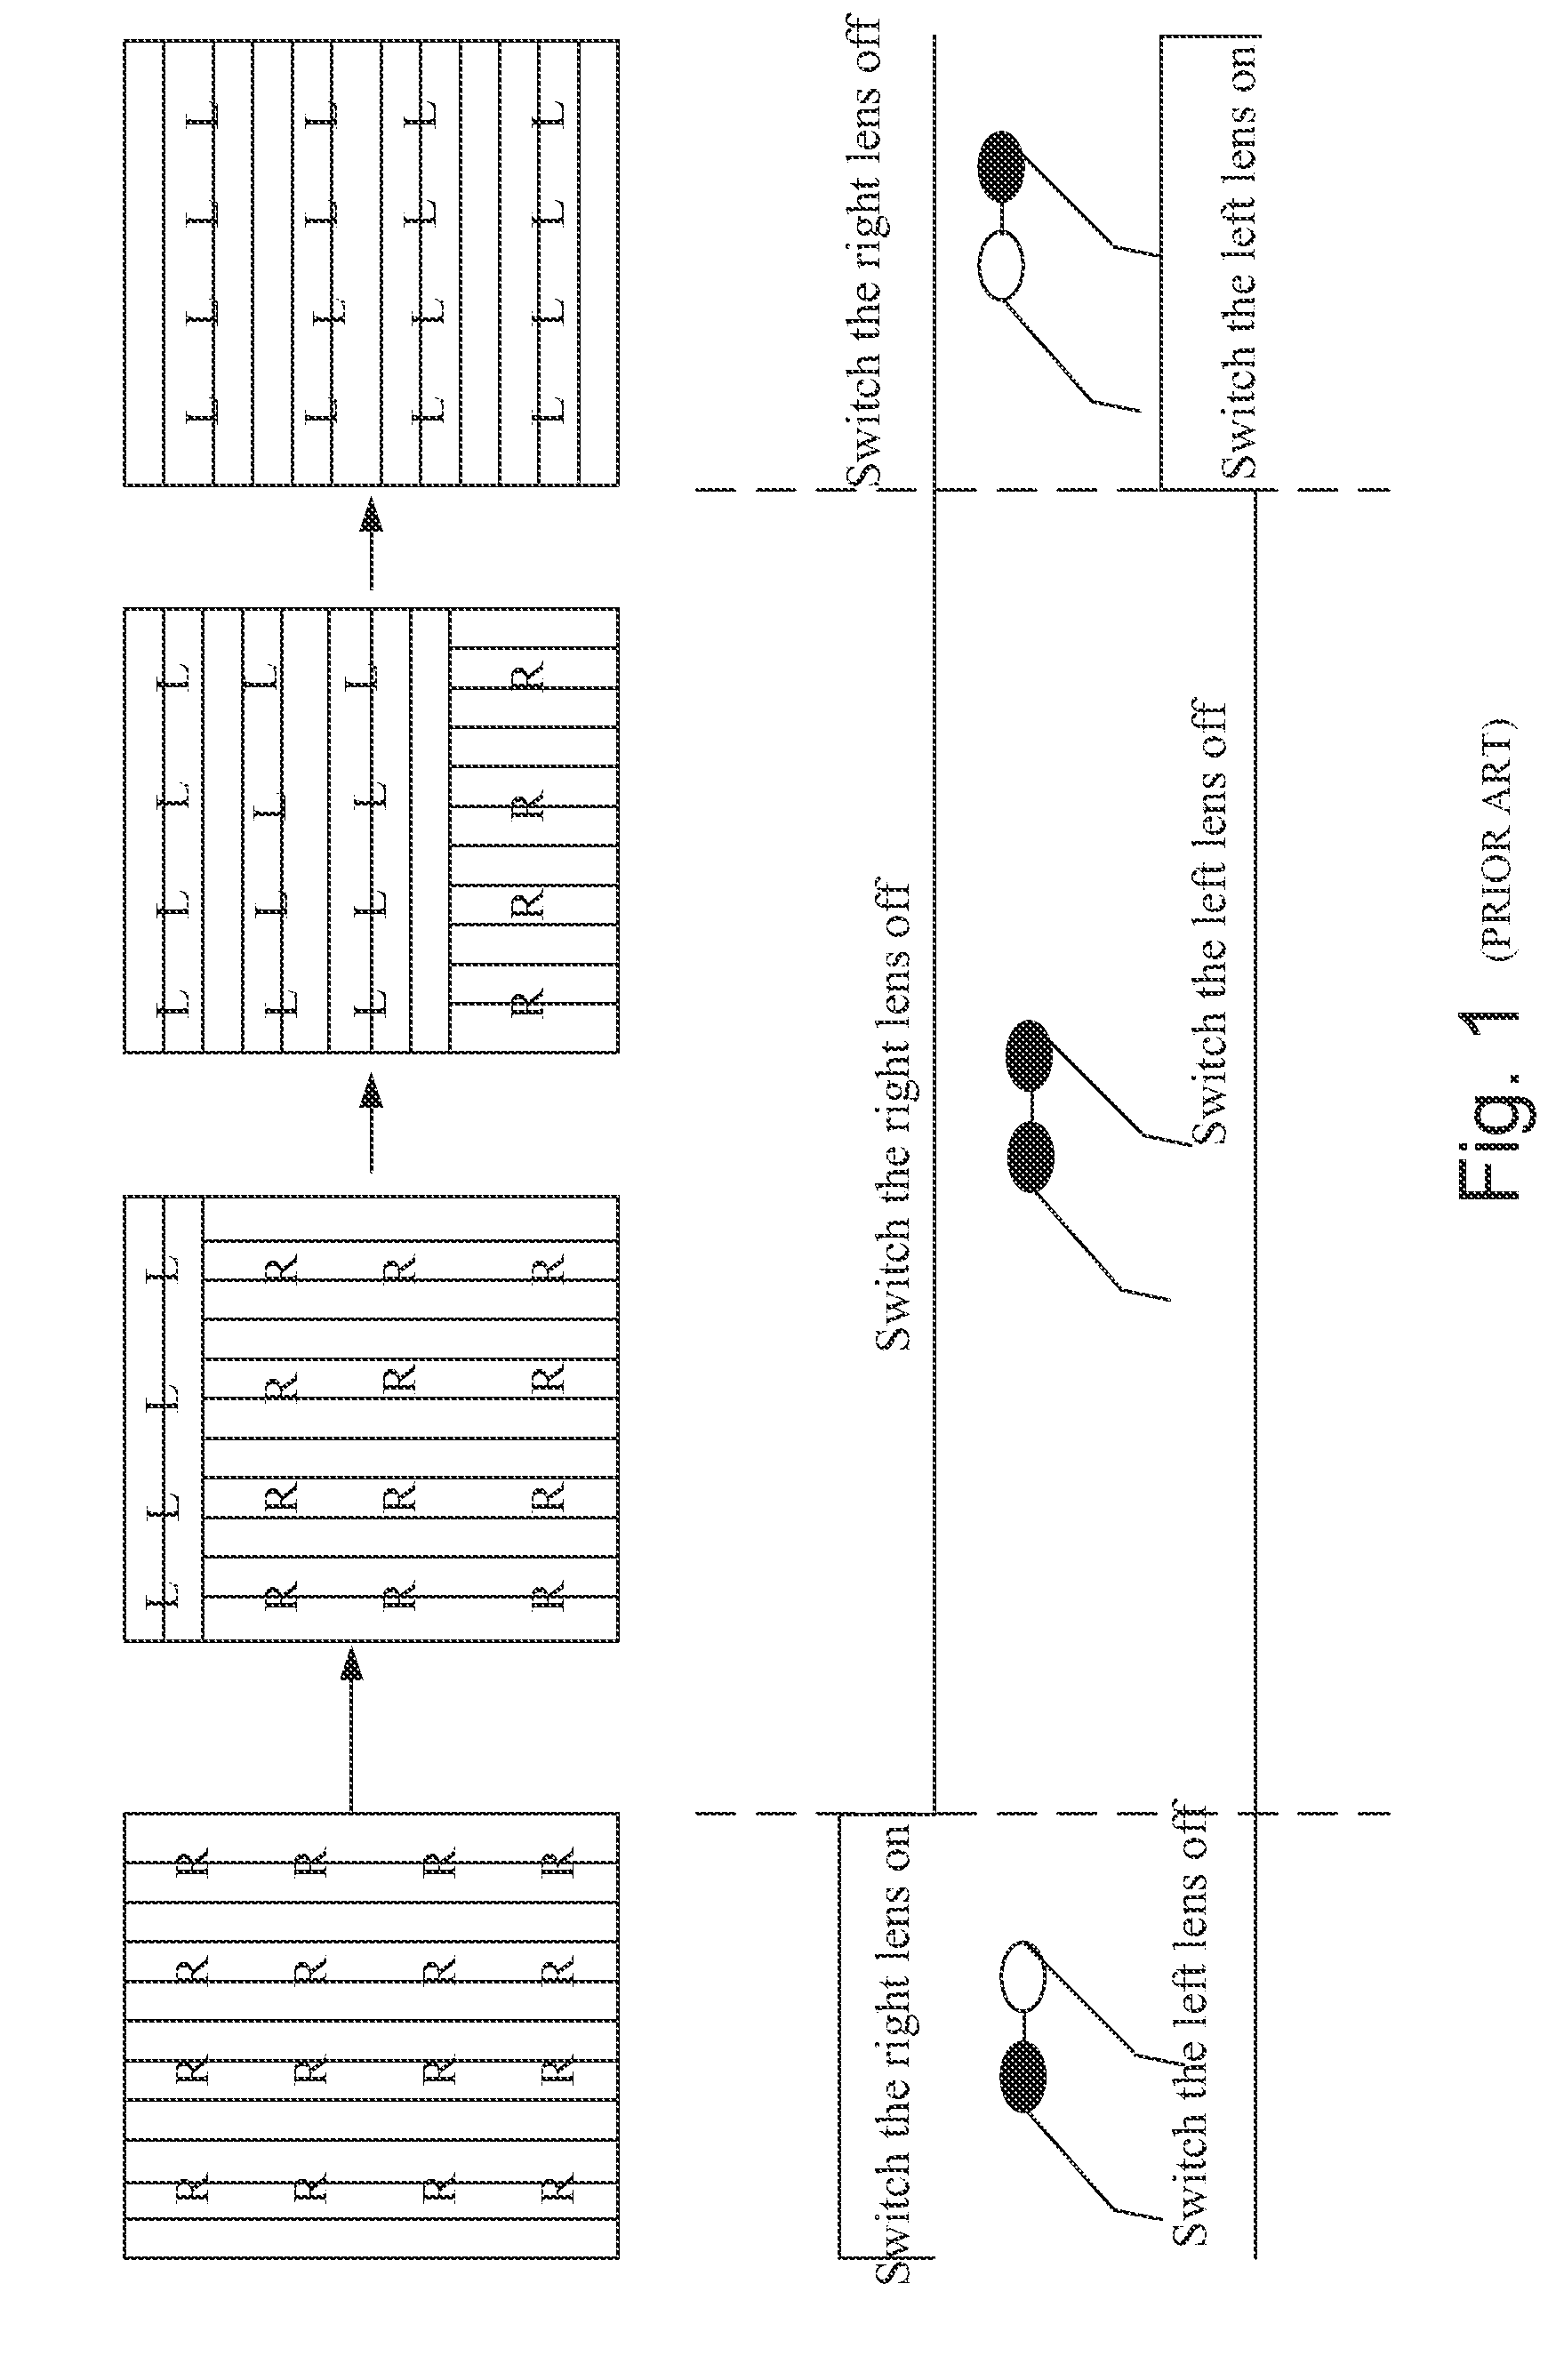 Liquid crystal display, system and method for displaying three-dimensional stereo pictures